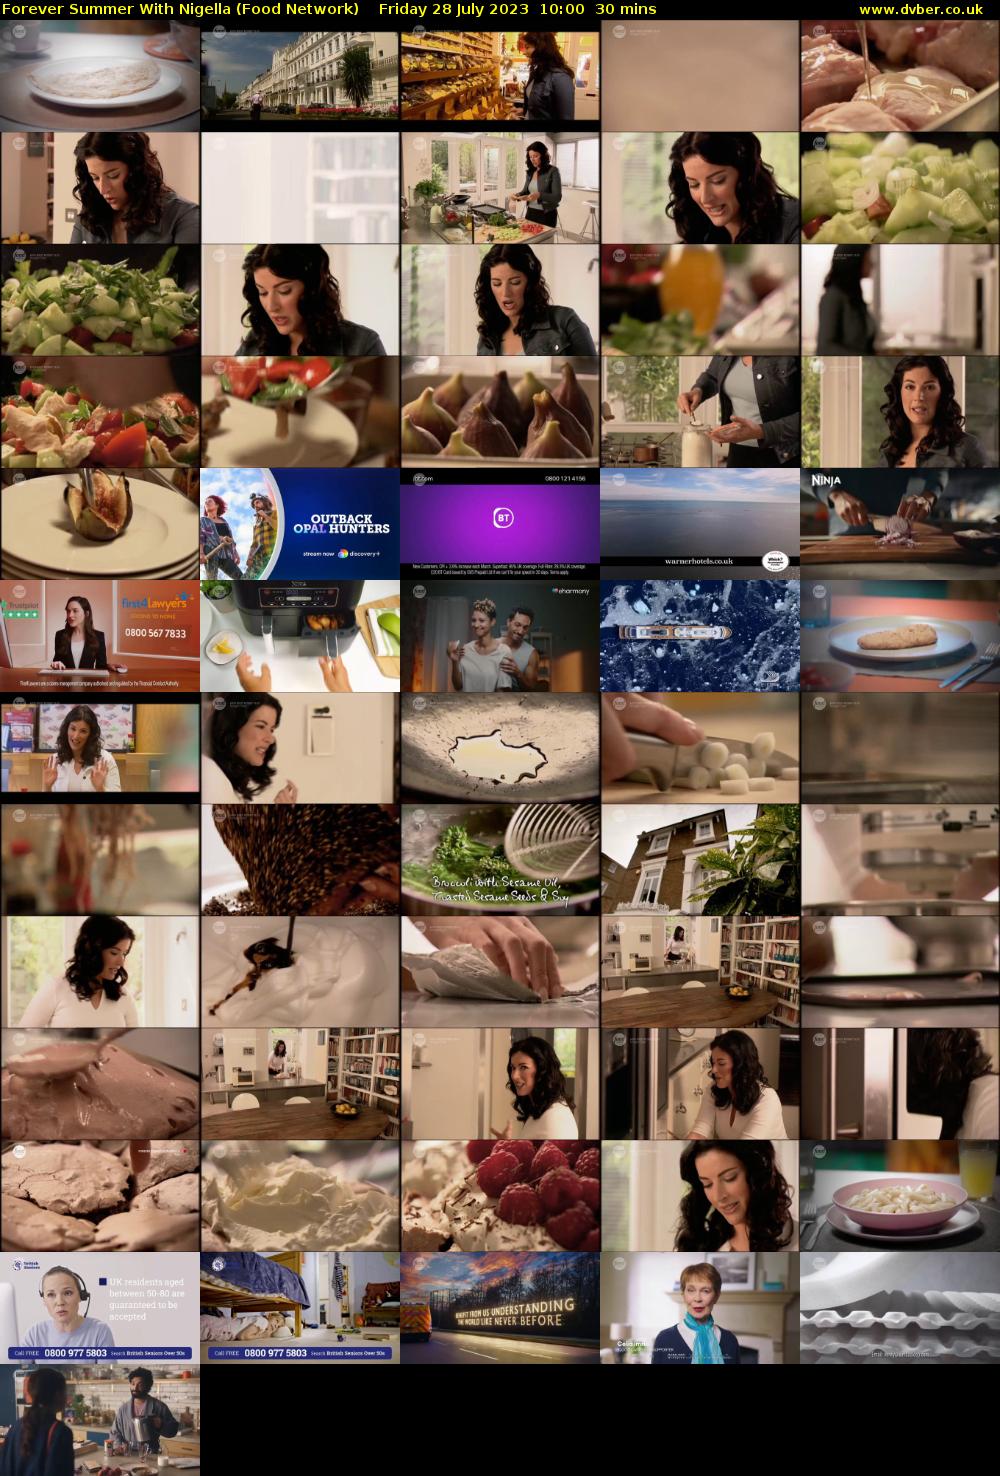 Forever Summer with Nigella (Food Network) Friday 28 July 2023 10:00 - 10:30